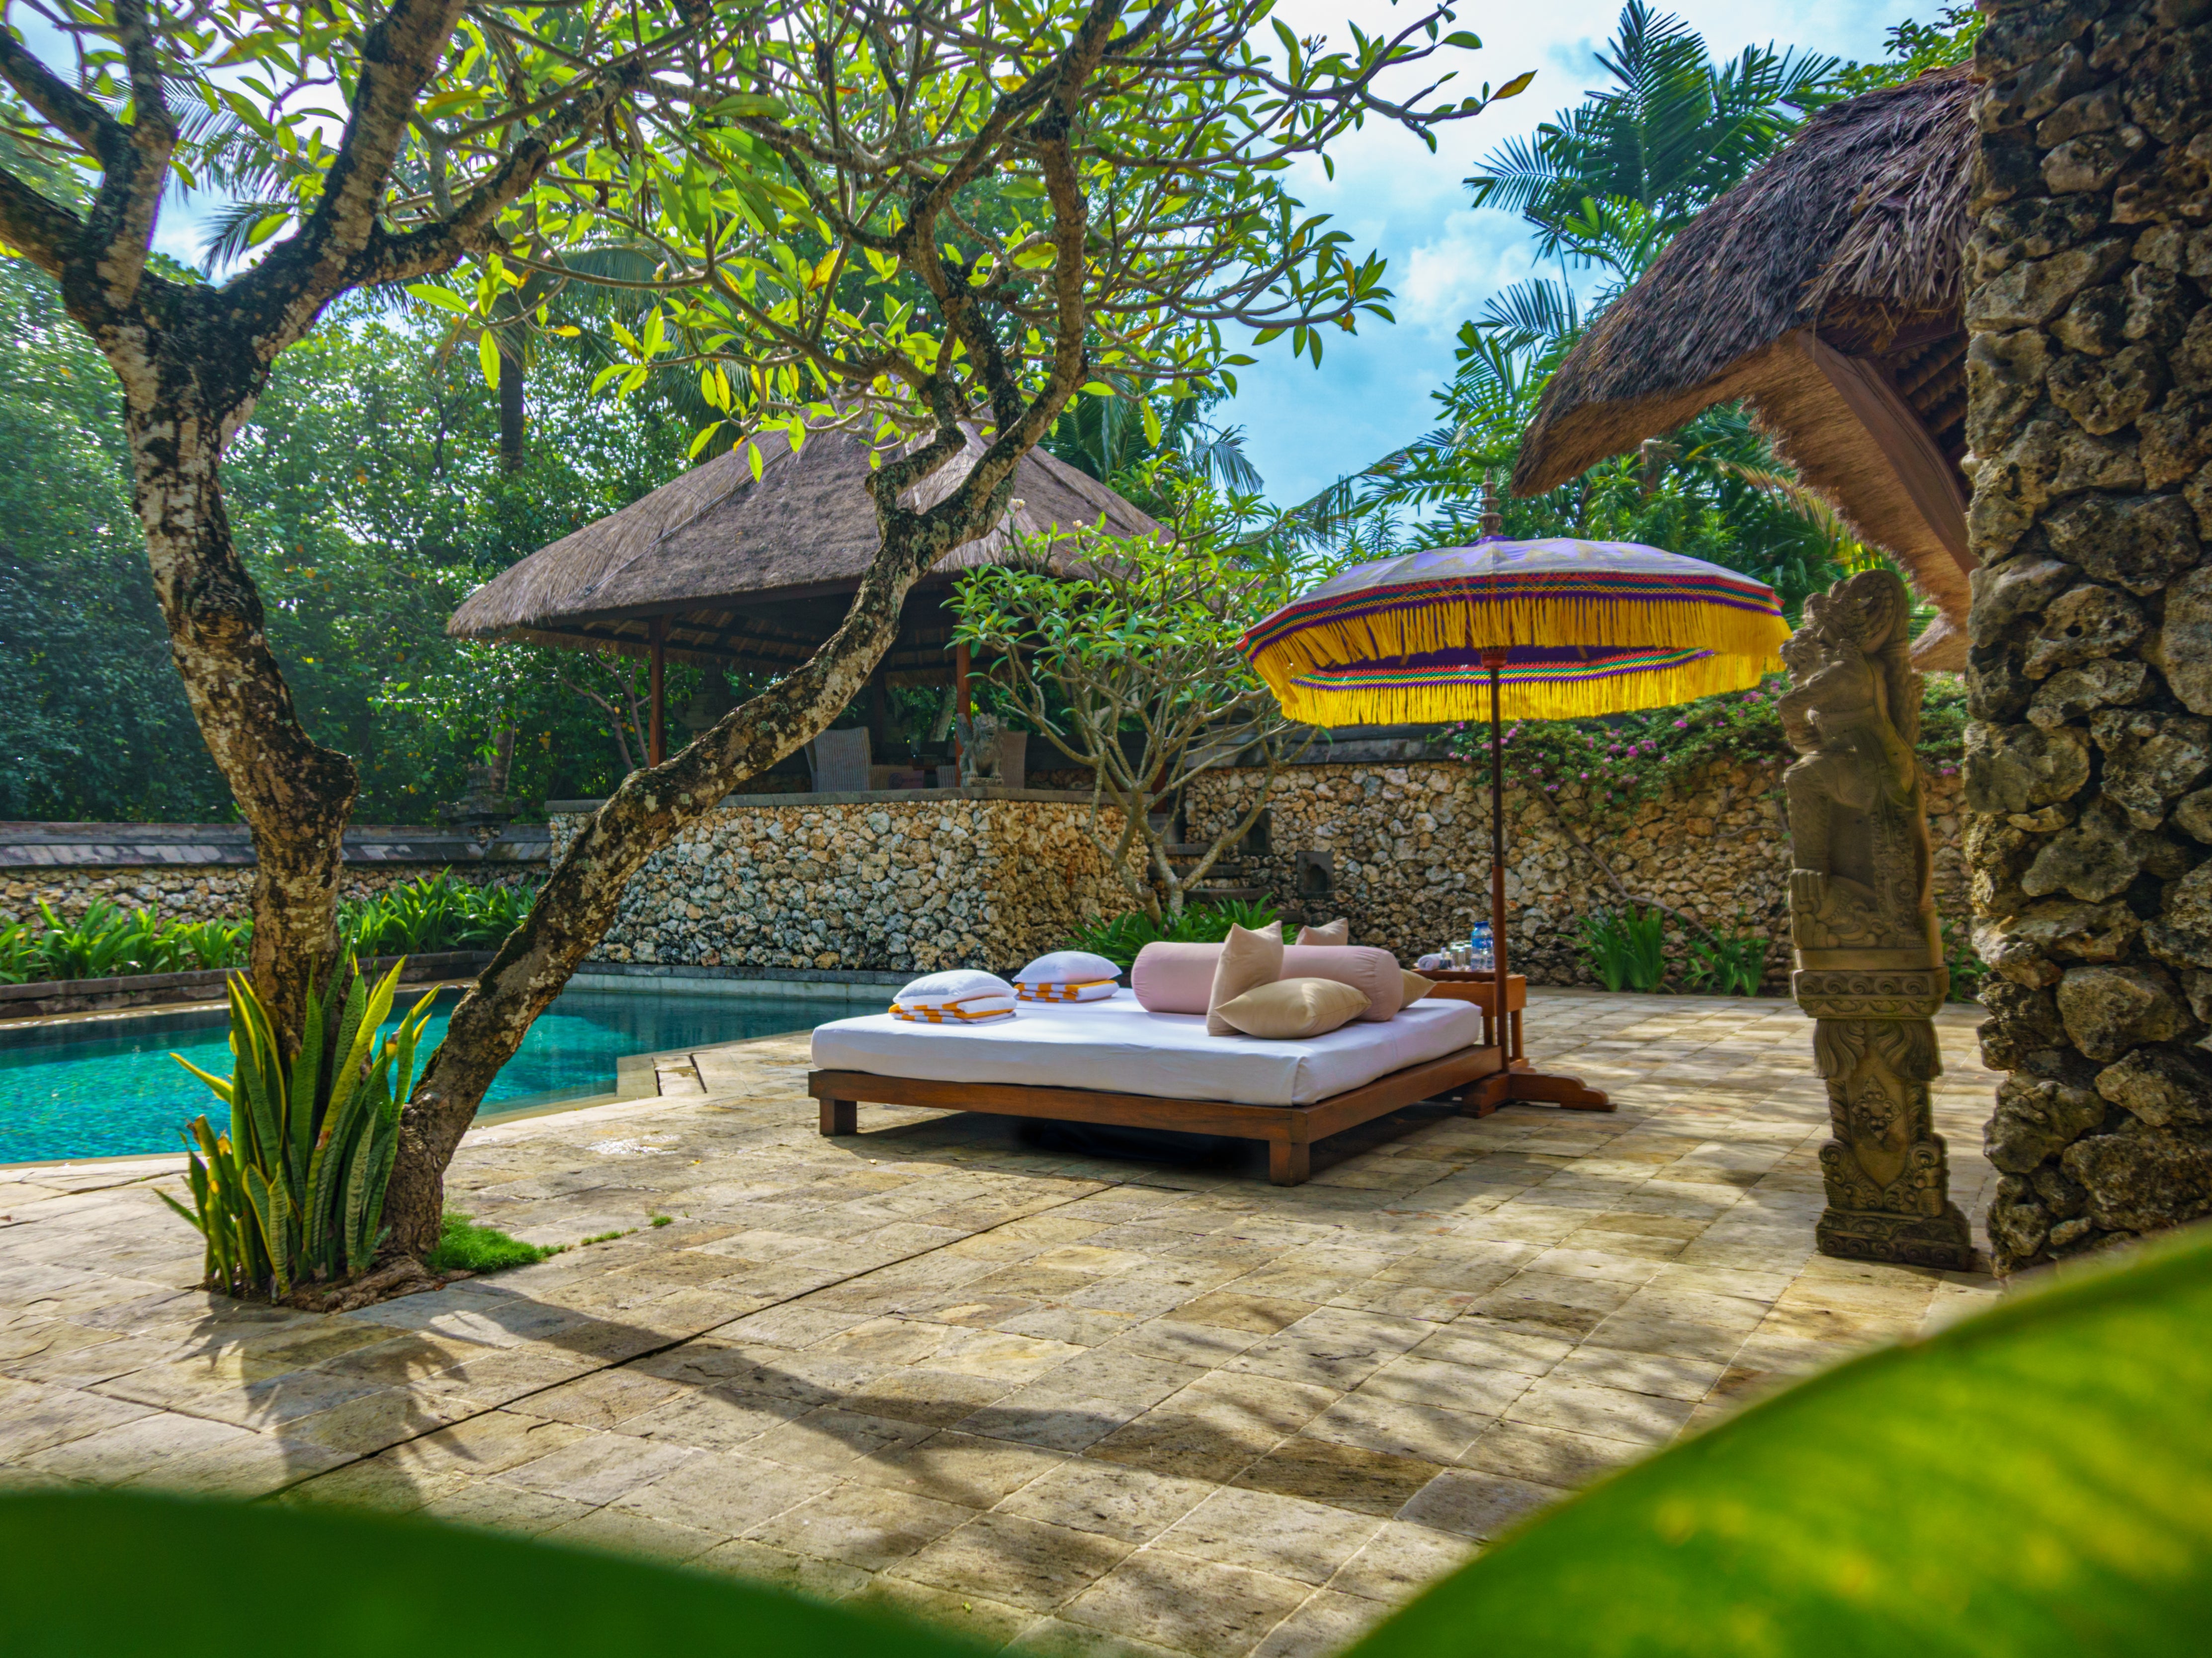 Time can disappear beside the pool at The Oberoi Beach Resort, Bali